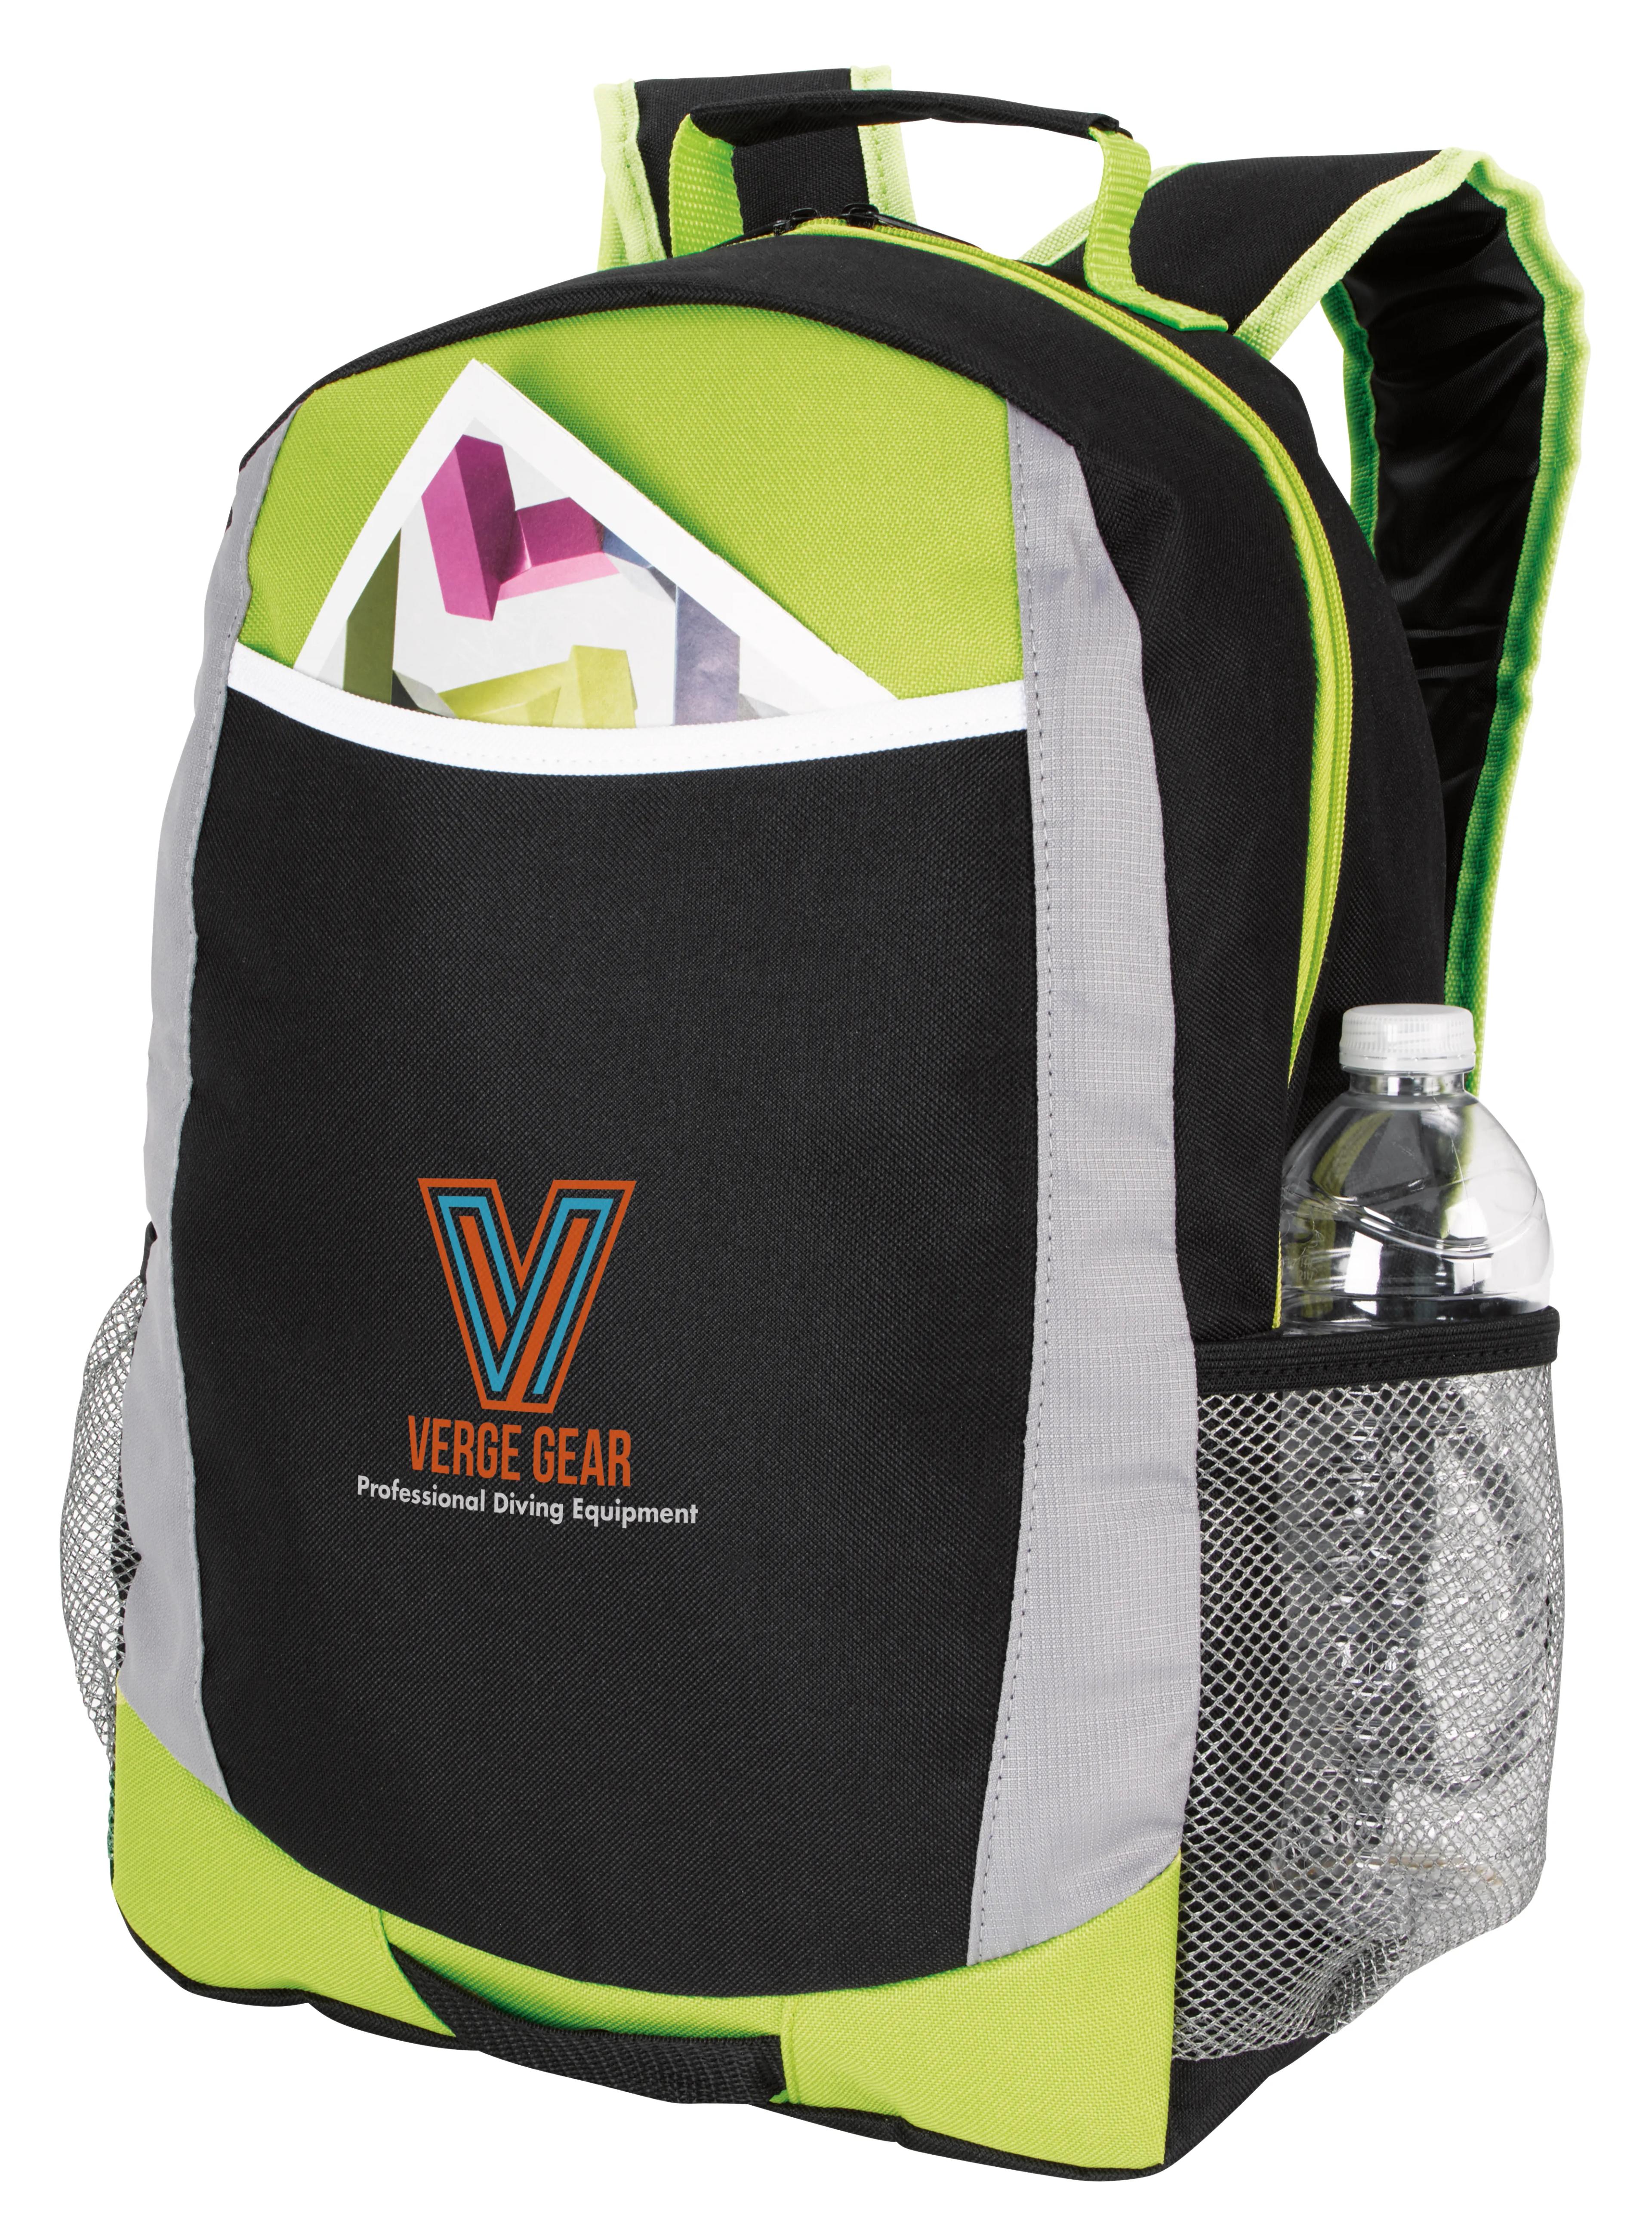 Primary Sport Backpack 9 of 14